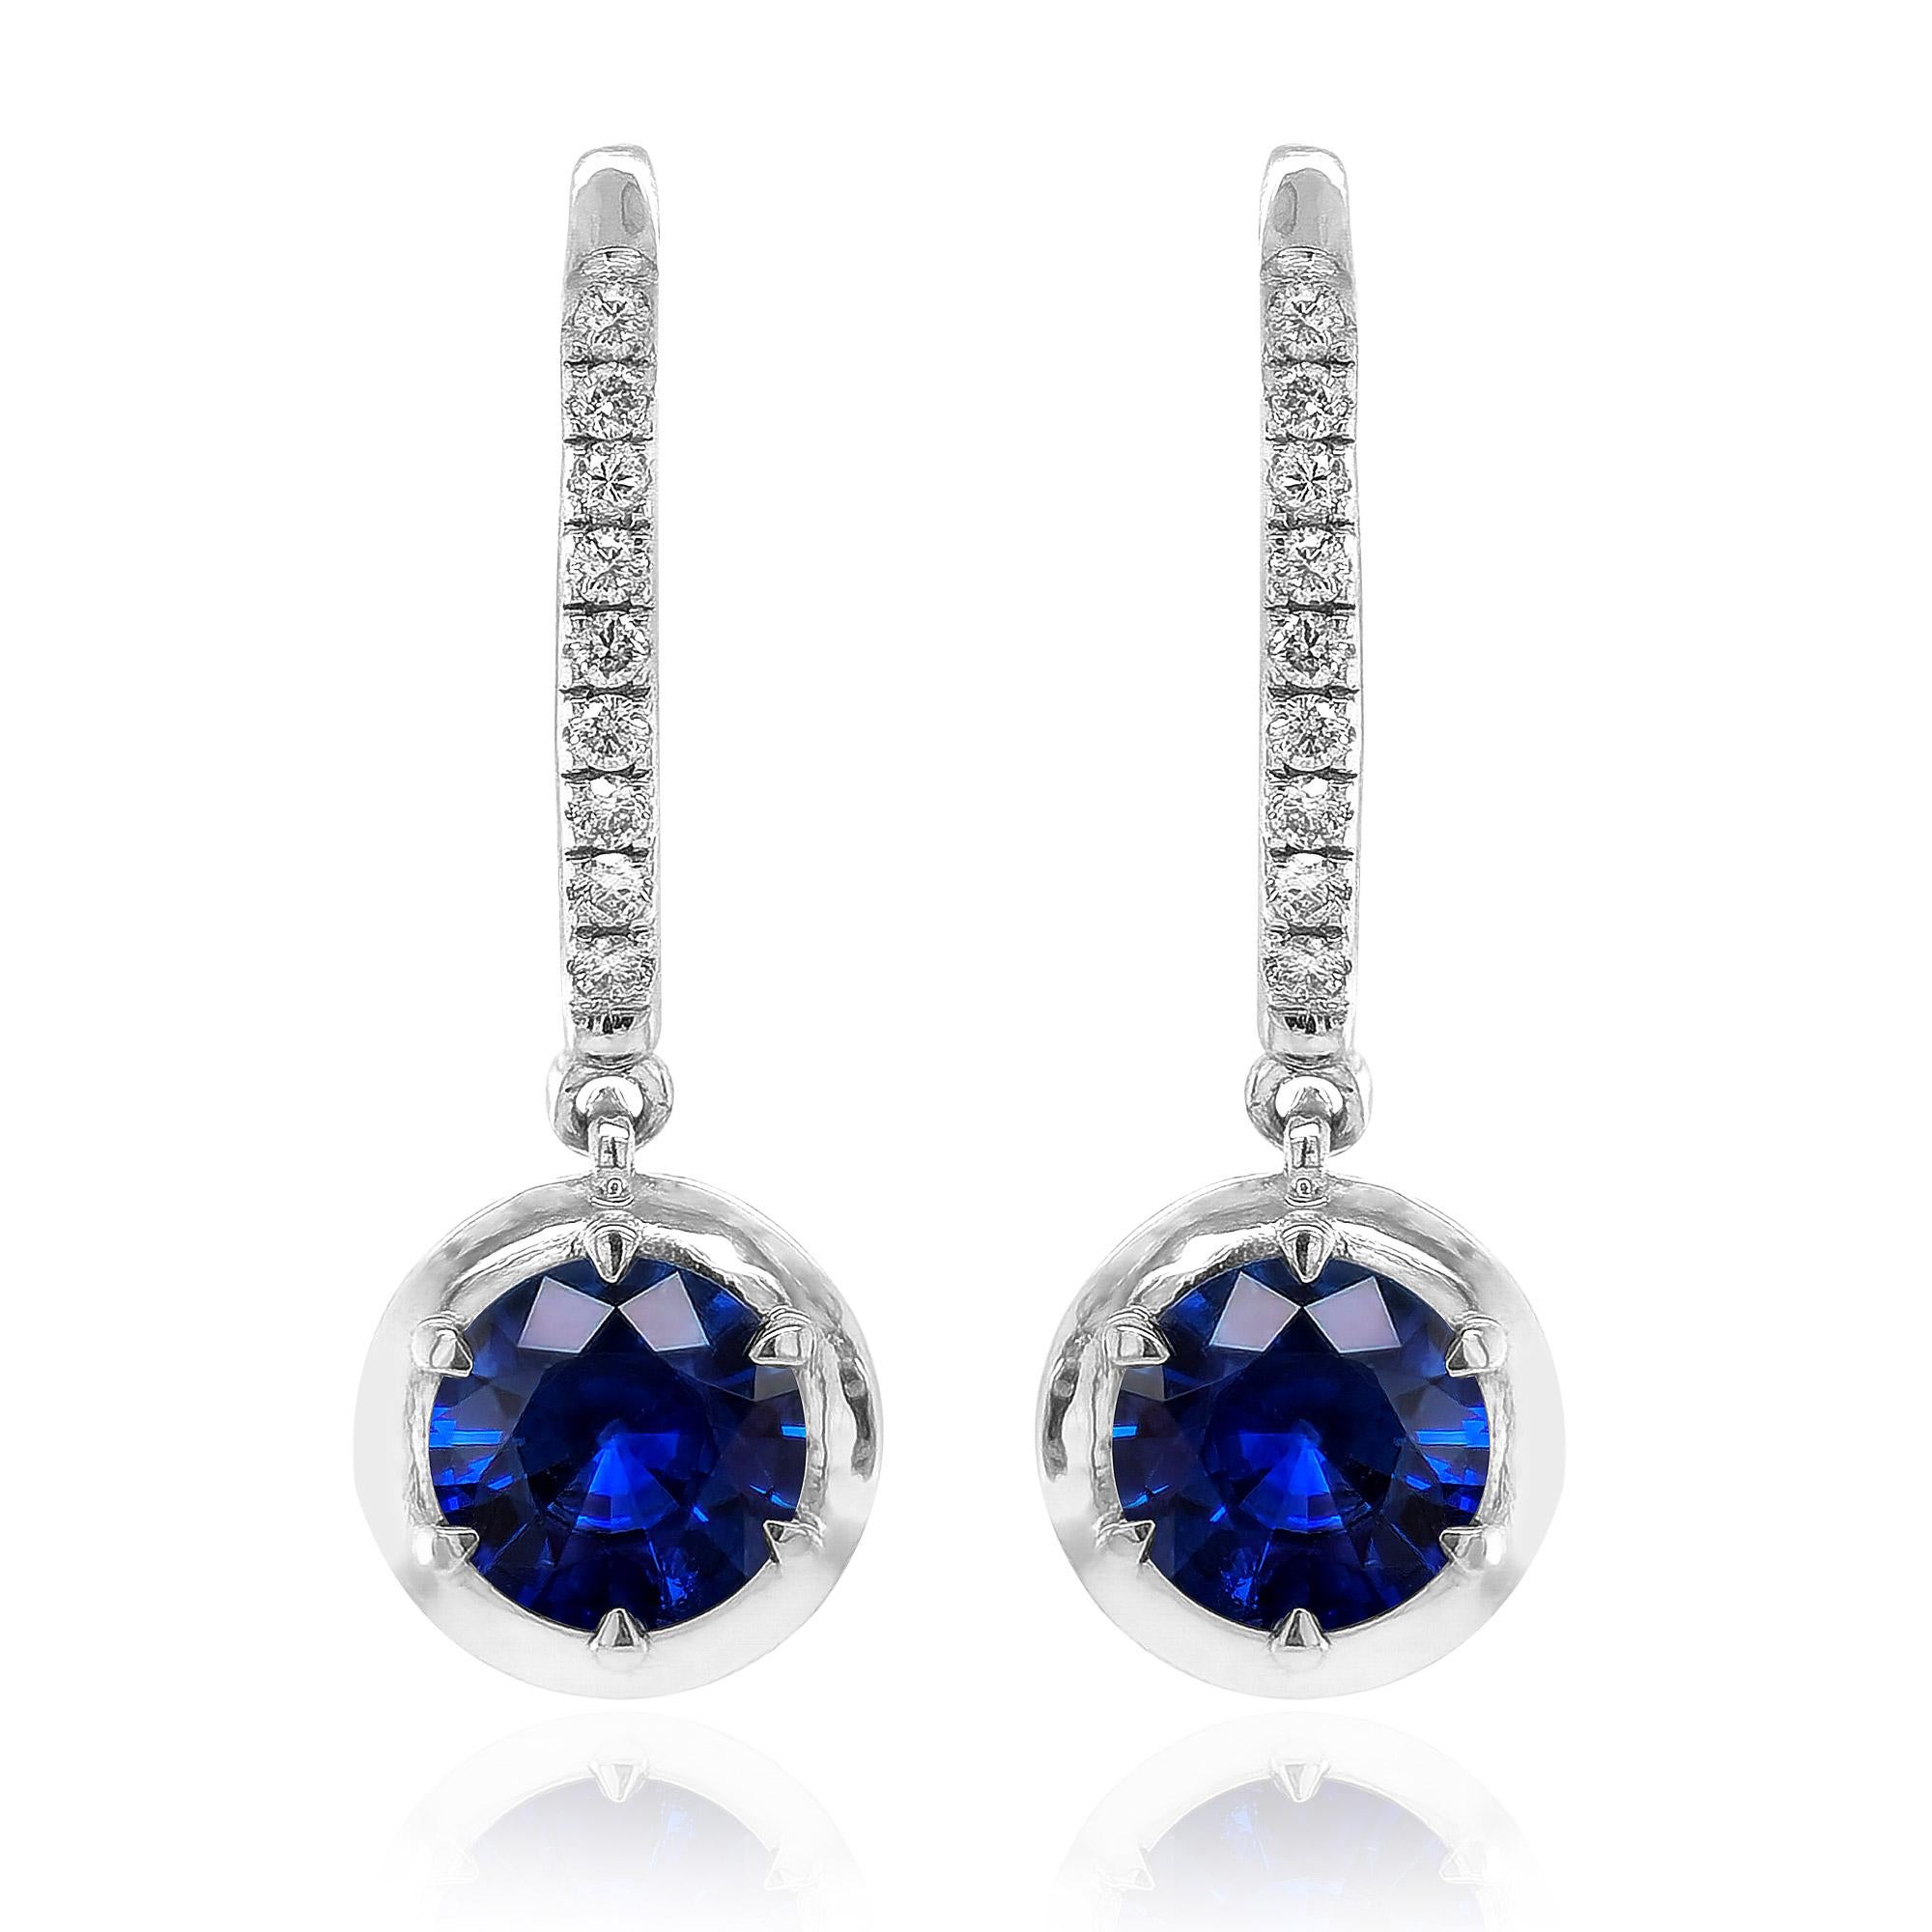 Natural Blue Sapphires 2.60 Carats set in 14K White Gold Earrings with Diamonds In New Condition For Sale In Los Angeles, CA